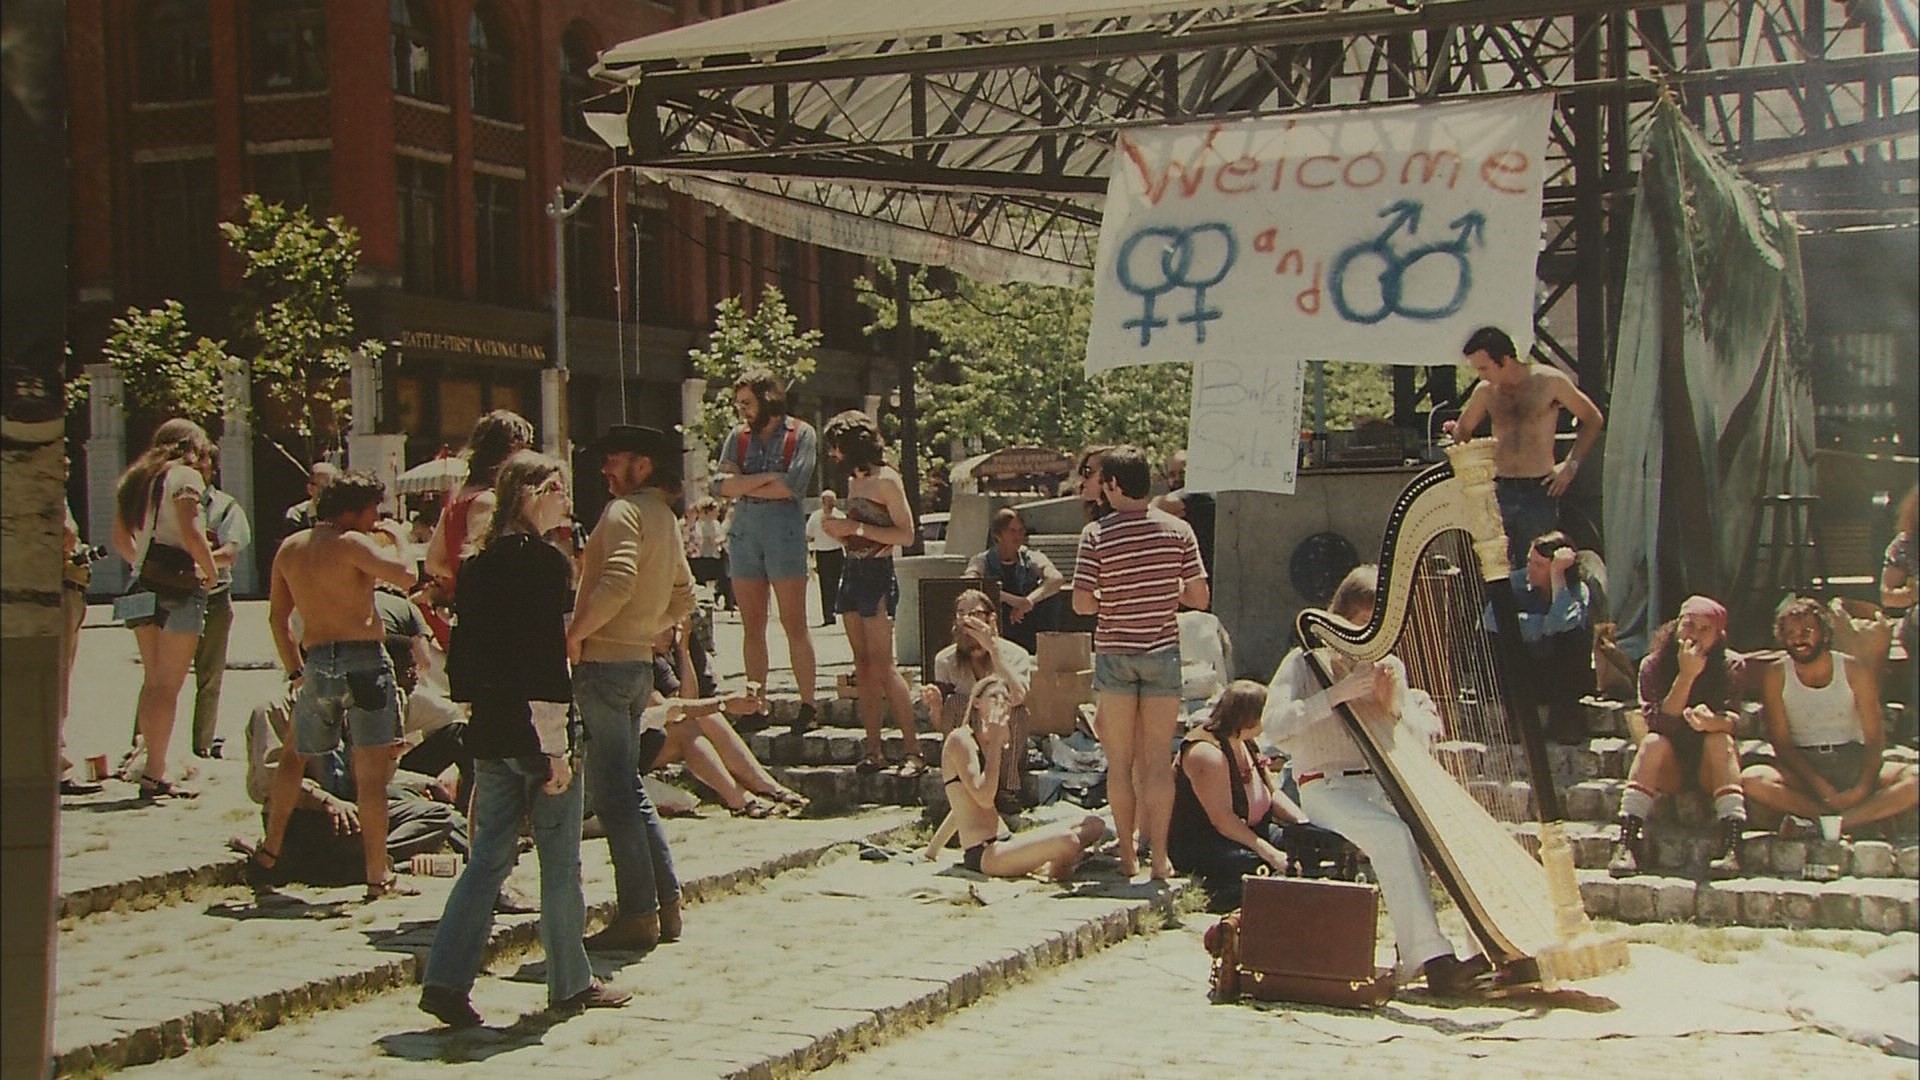 It's a statement and a celebration.  But when Seattle Pride Week began back in 1974, it was also an act of courage. #k5evening